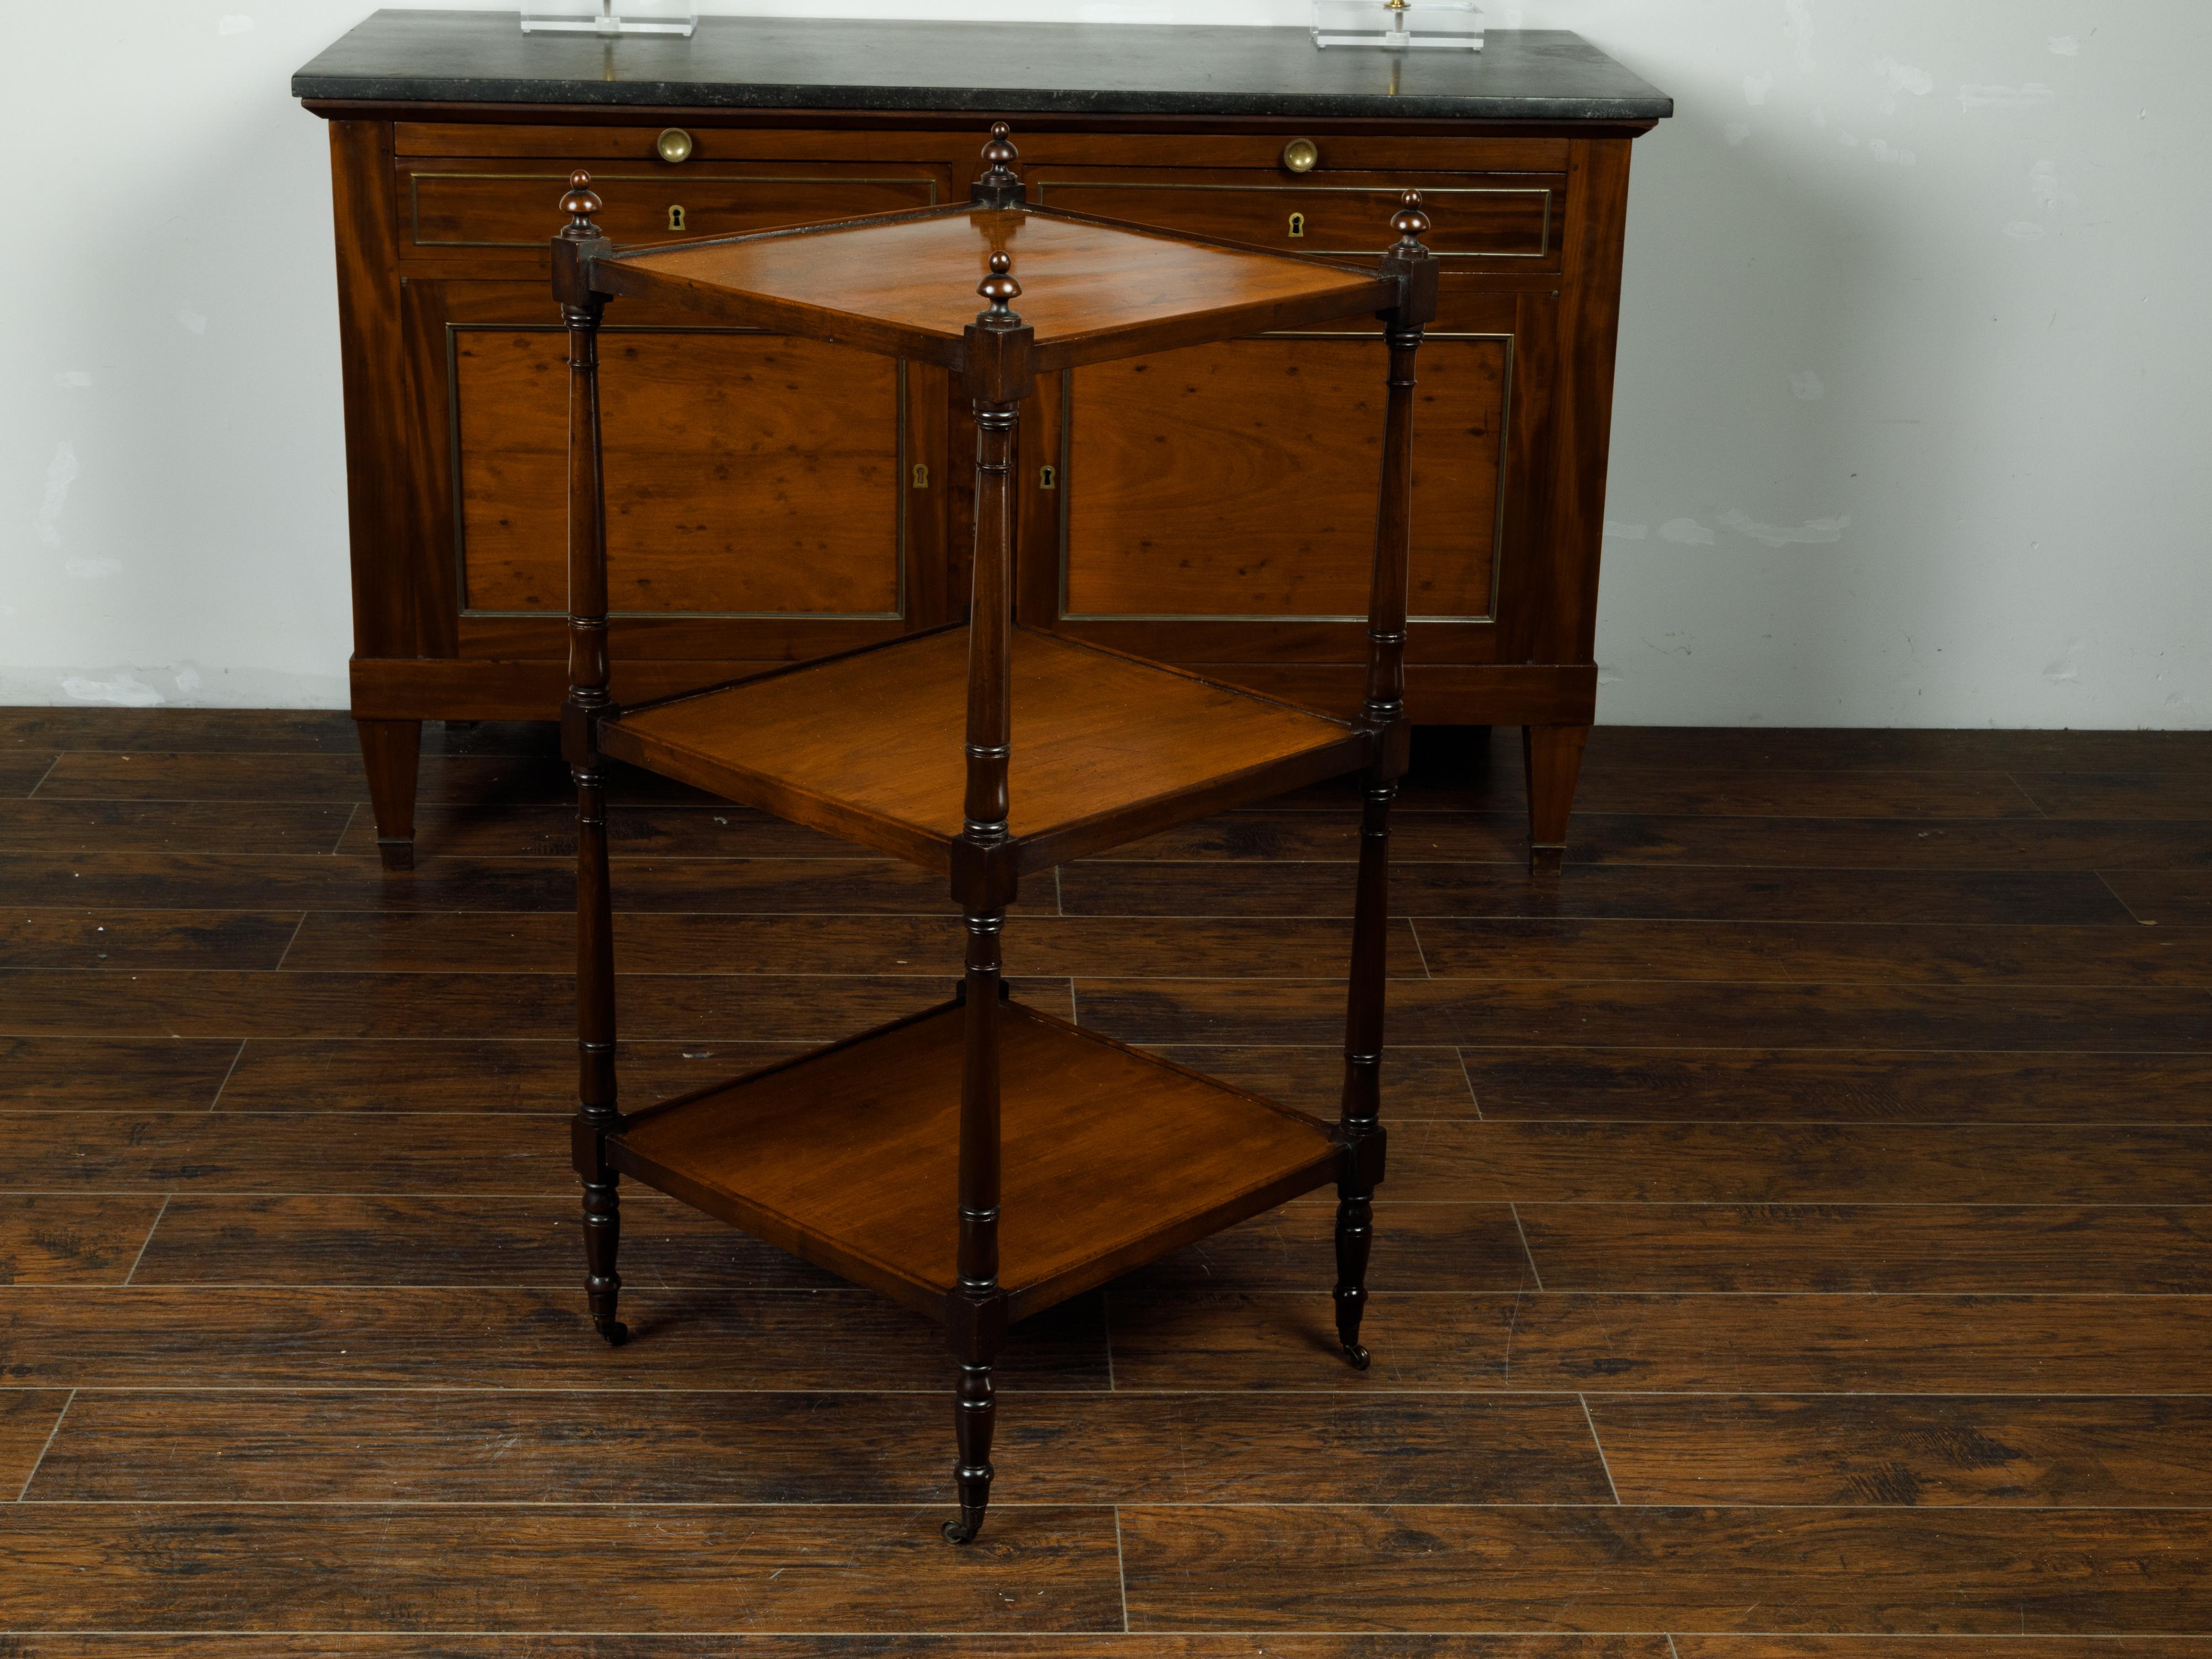 An English mahogany three-tiered trolley from the late 19th century, with turned side posts and finials. Created in England during the third quarter of the 19th century, this mahogany trolley features three rectangular shelves secured within four